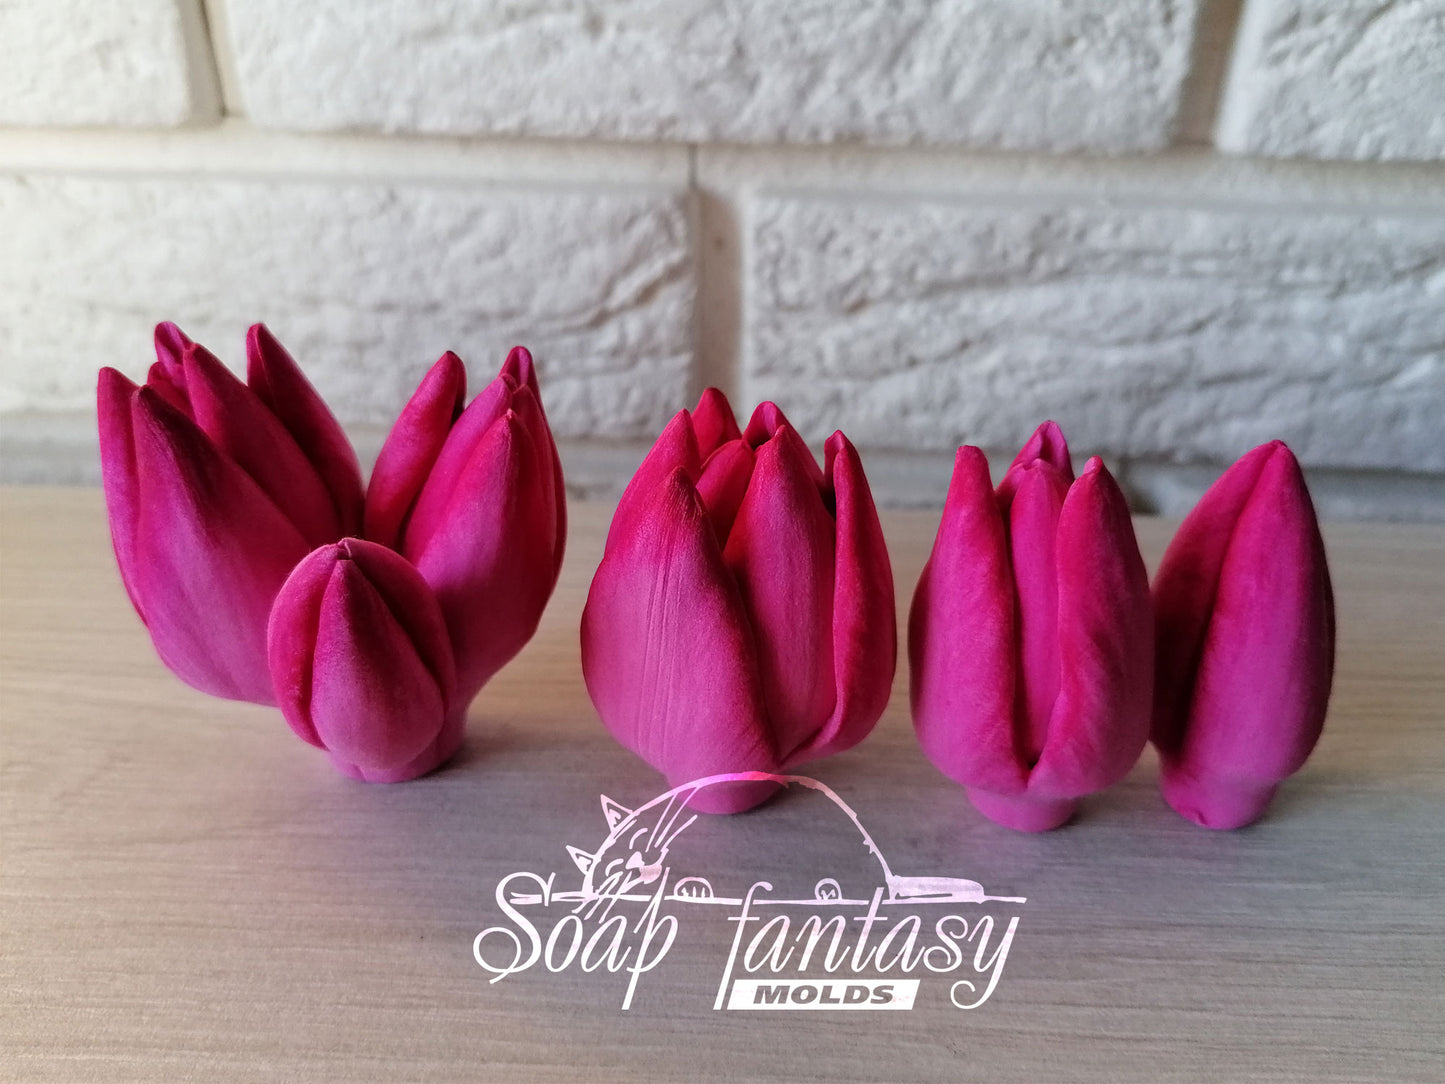 Tulip "Purple prince" triplet silicone mold for soap making